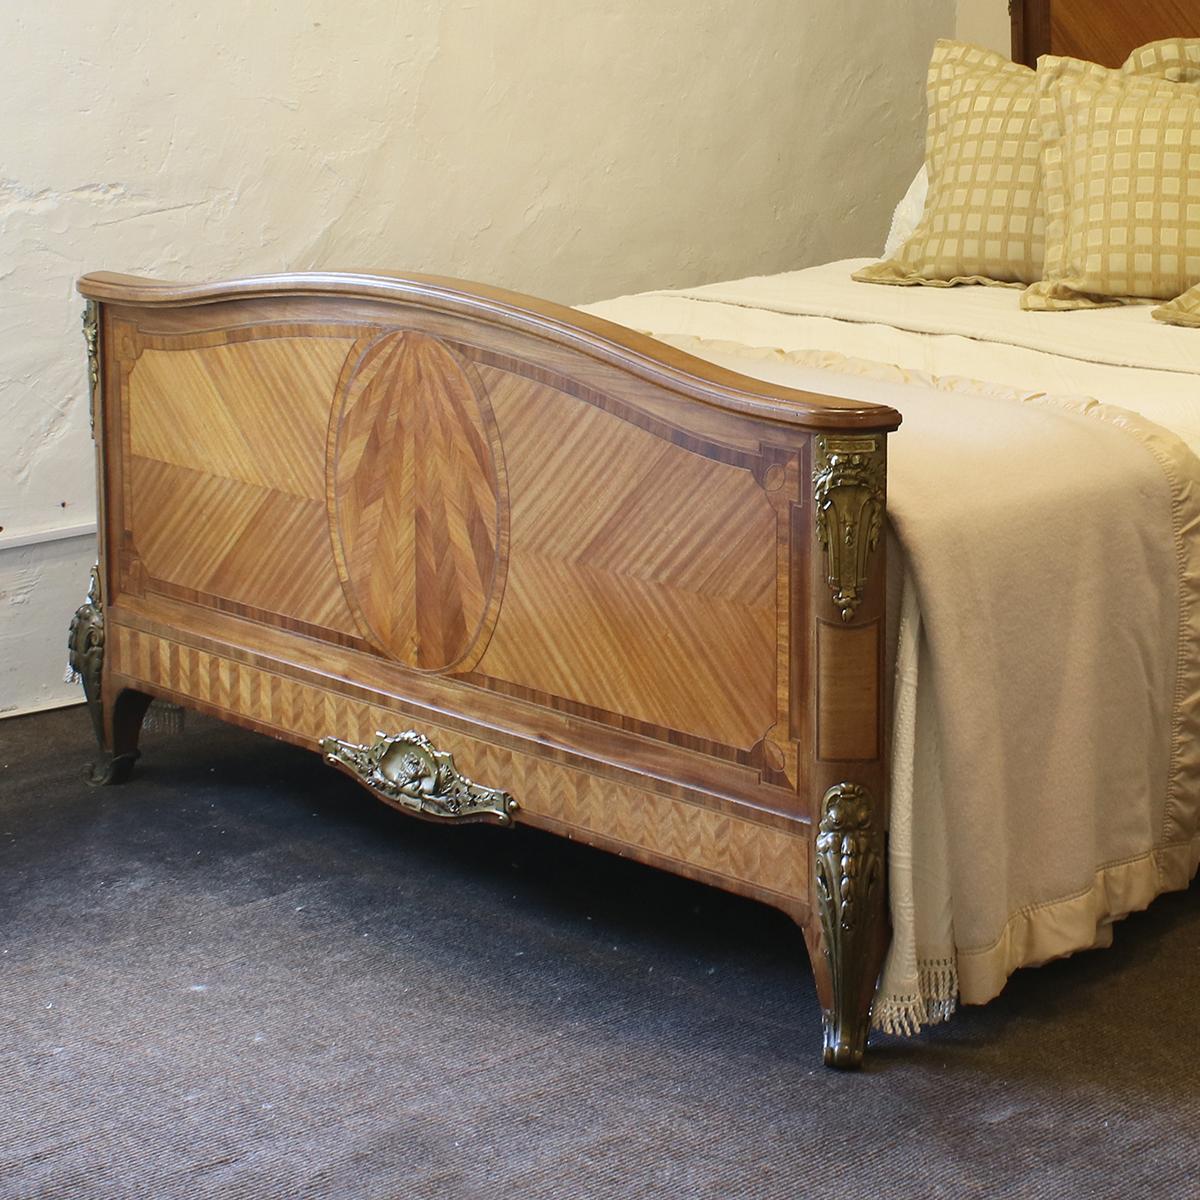 A French Empire style mahogany bedstead with stunning brass ormolu decoration, lions brass feet and parquetry sunburst on the footboard.

This bed accepts a British King size or American Queen size, 5ft wide (60 inches or 150cm) base and mattress